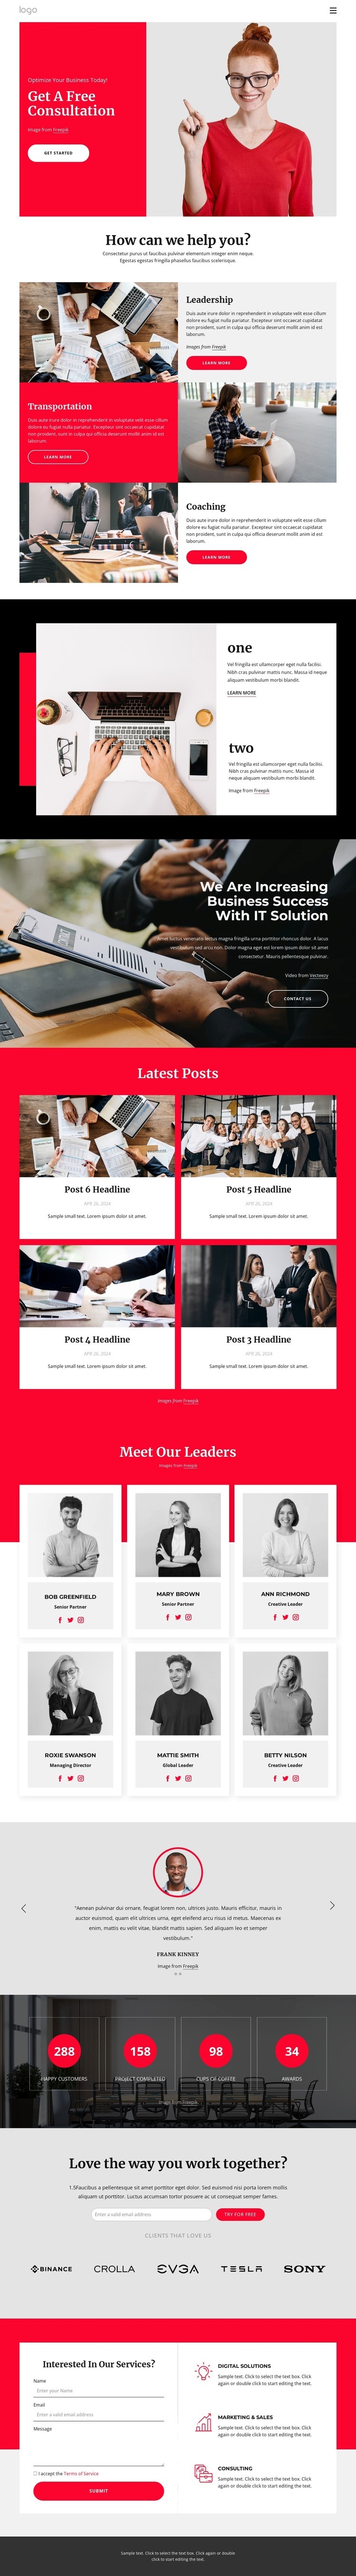 Business coaching and consulting Webflow Template Alternative